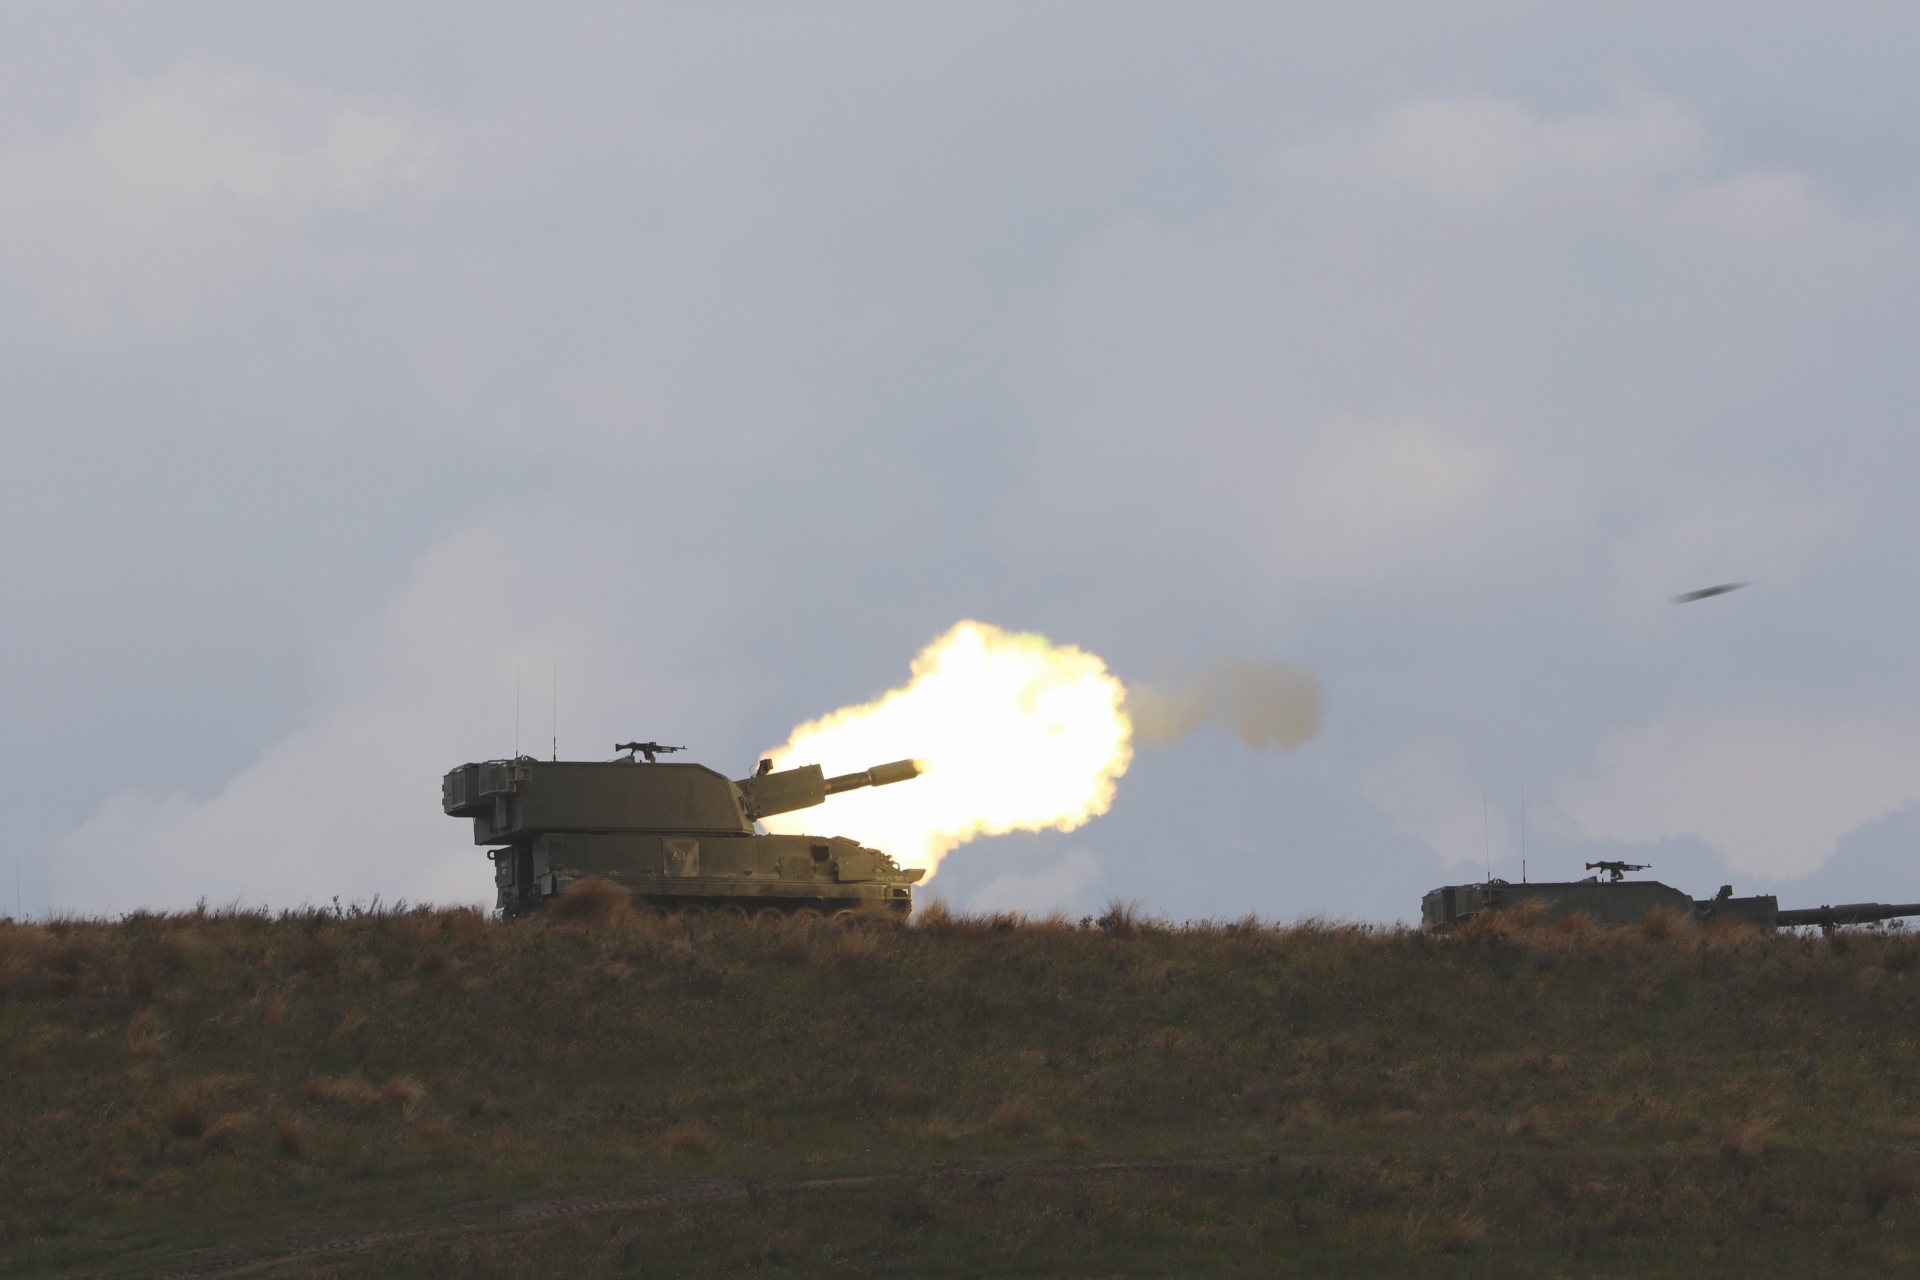 A Singapore Self-Propelled Howitzer participating in the live firing exercise at Waiouru Training Area, New Zealand.